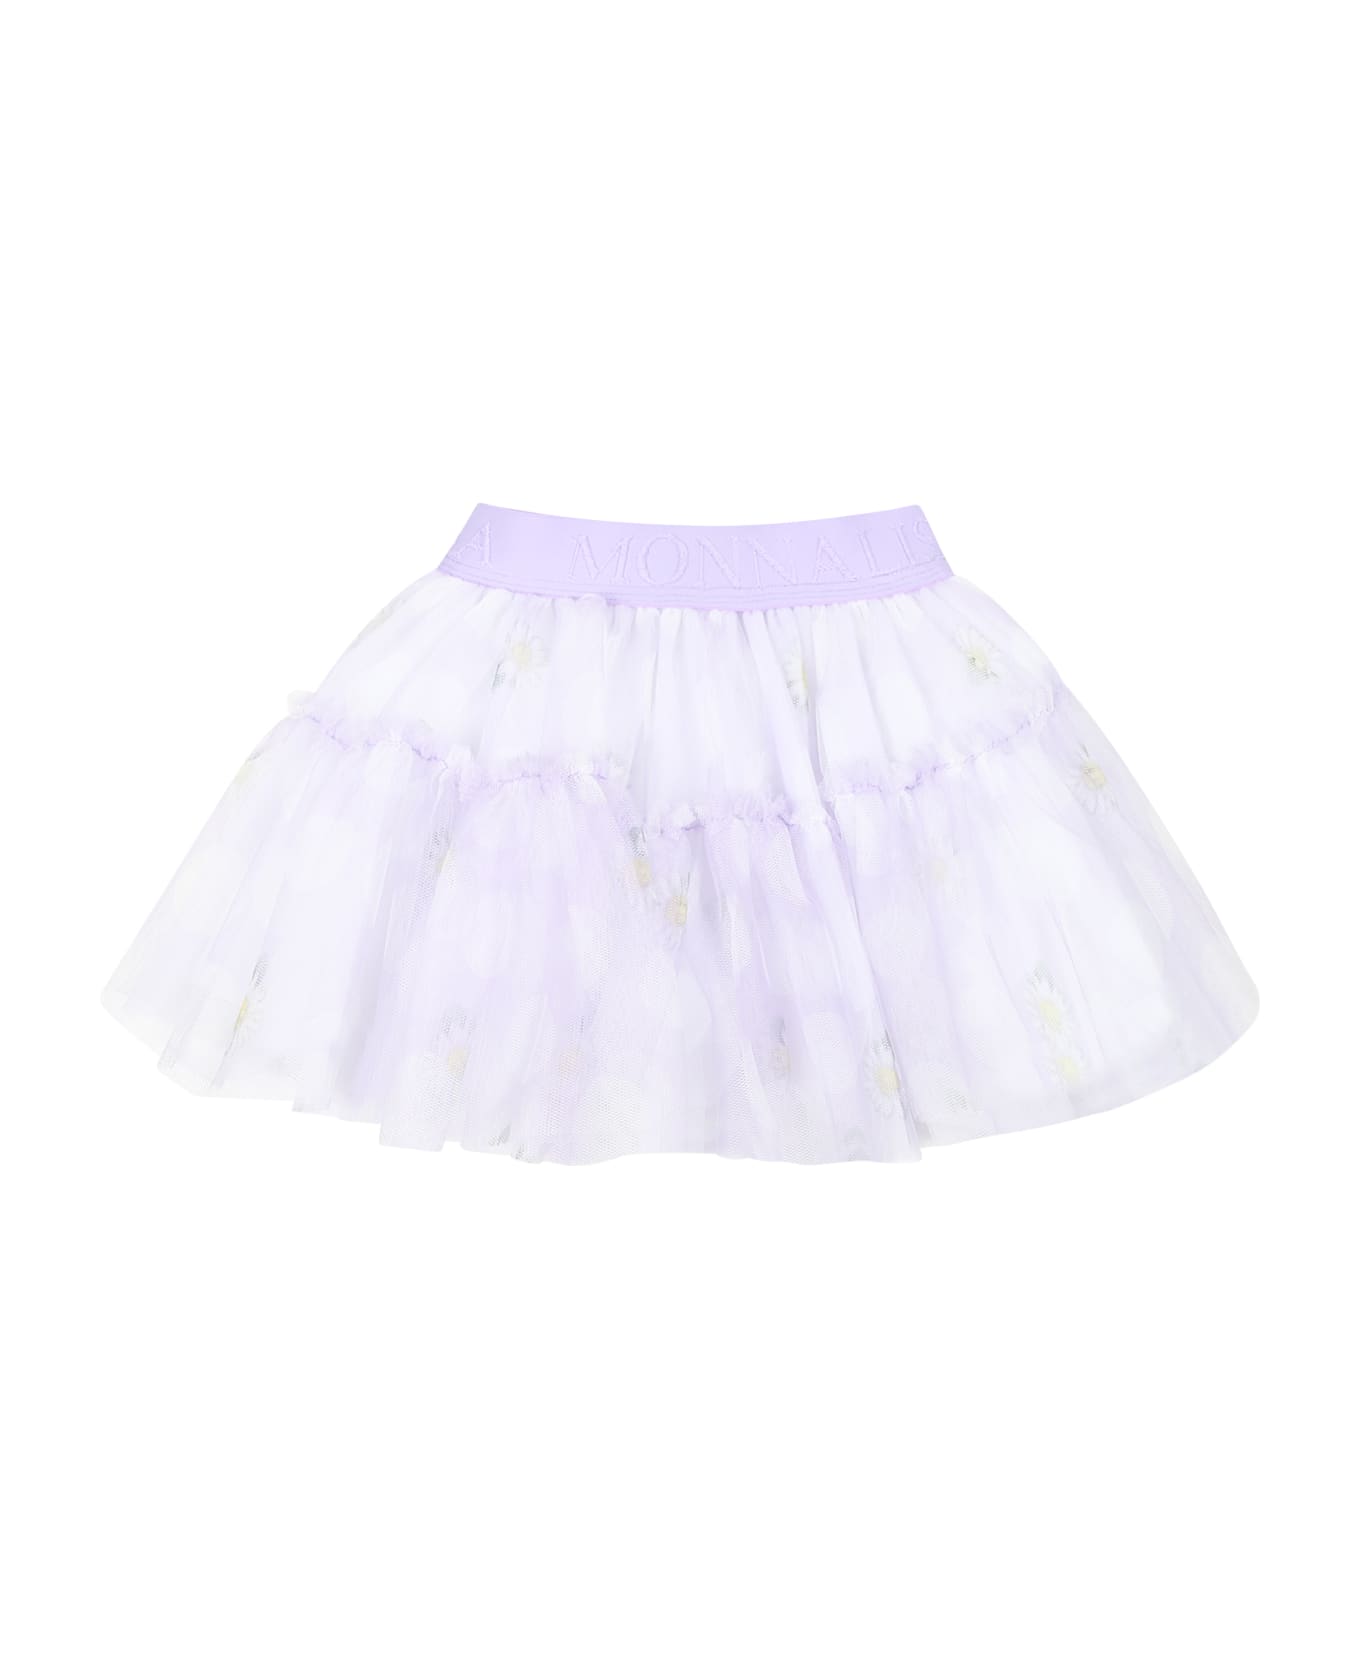 Monnalisa Purple Skirt For Baby Girl With Daisy Print - Violet